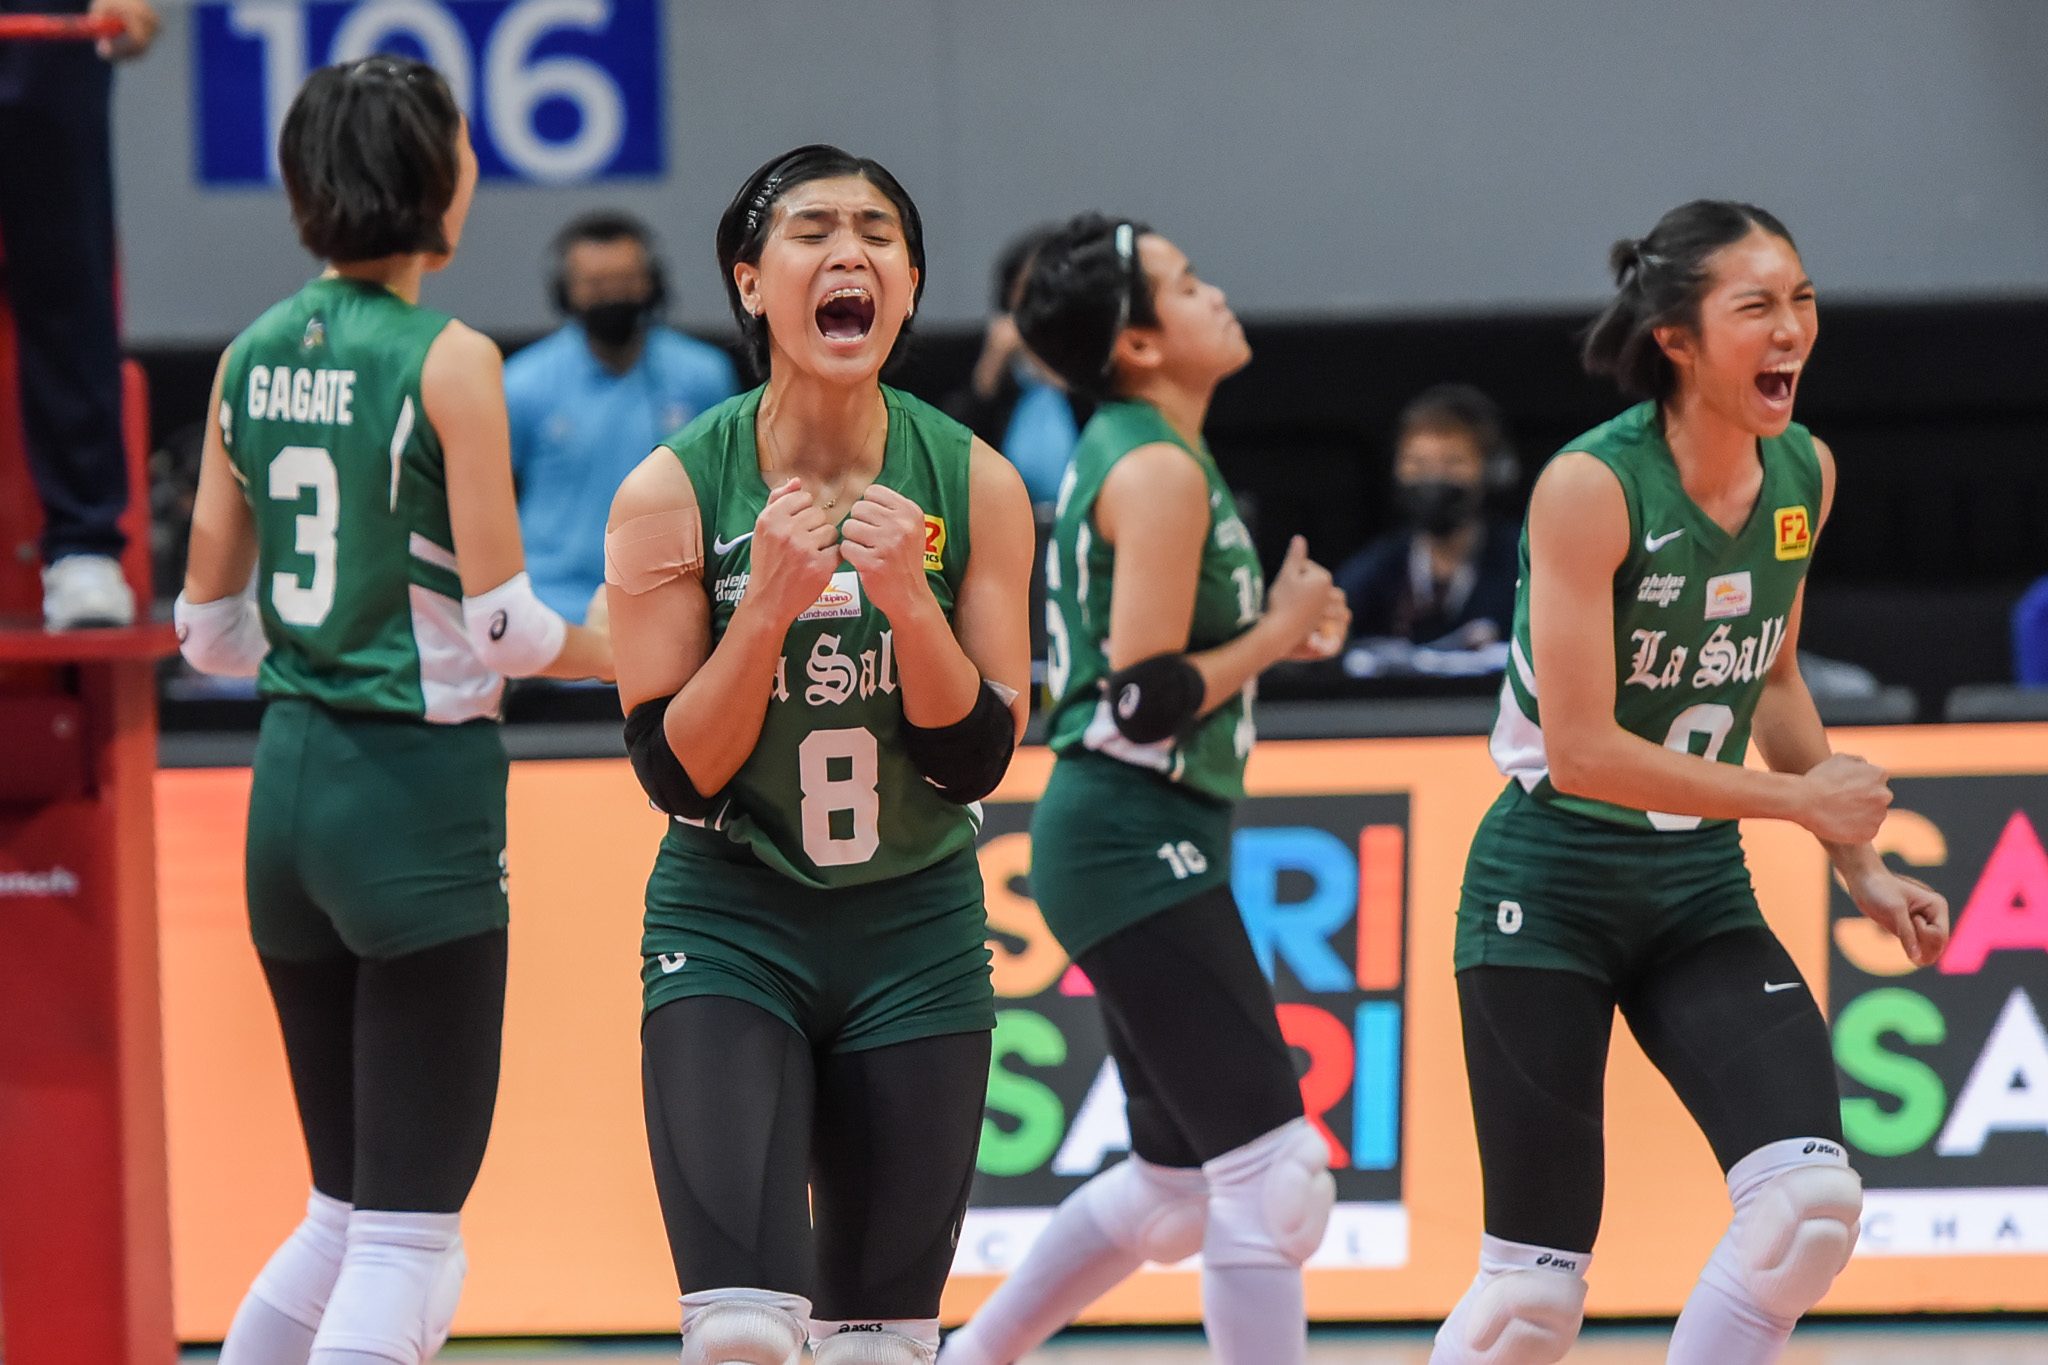 Manpower woes worry La Salle in Super League stint